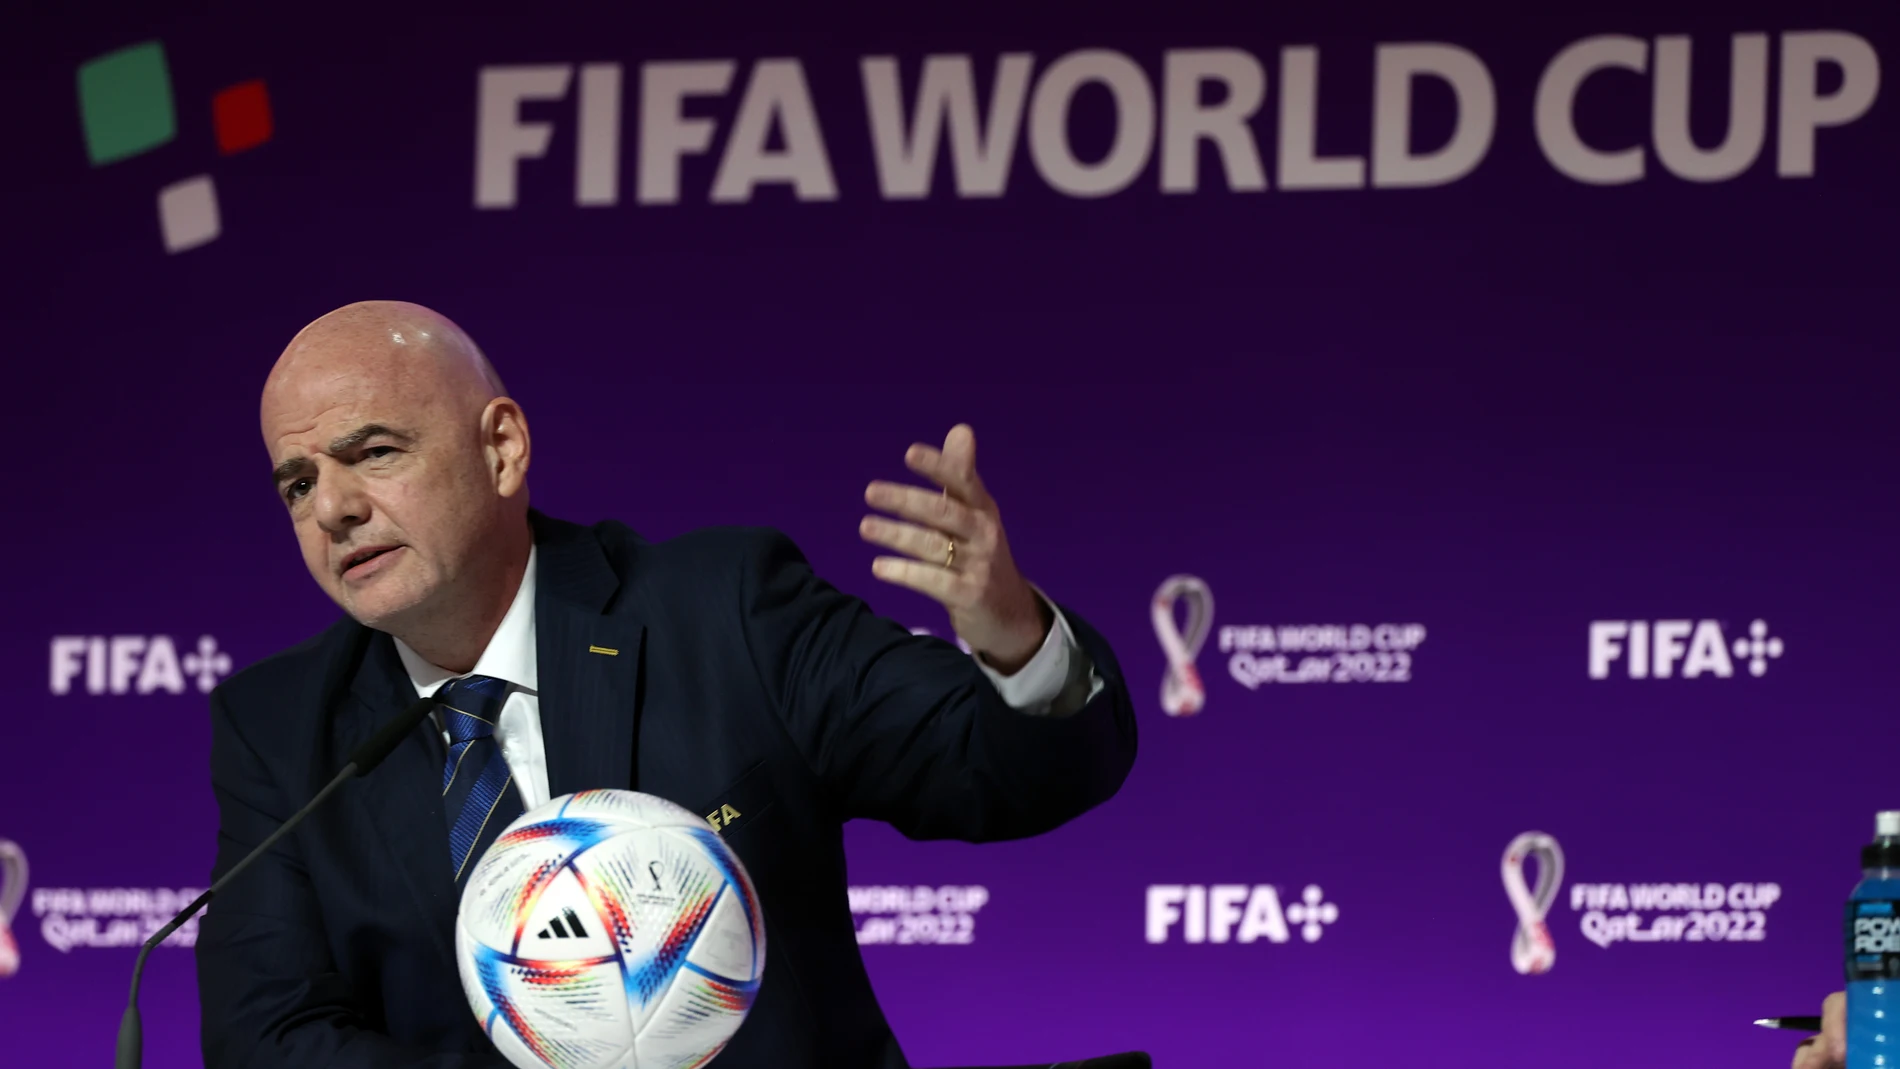 Doha (Qatar), 19/11/2022.- FIFA President Gianni Infantino addresses a press conference in Doha, Qatar, 19 November 2022. The FIFA World Cup Qatar 2022 will take place from 20 November to 18 December 2022. (Mundial de Fútbol, Catar) EFE/EPA/MOAHAMED MESSARA